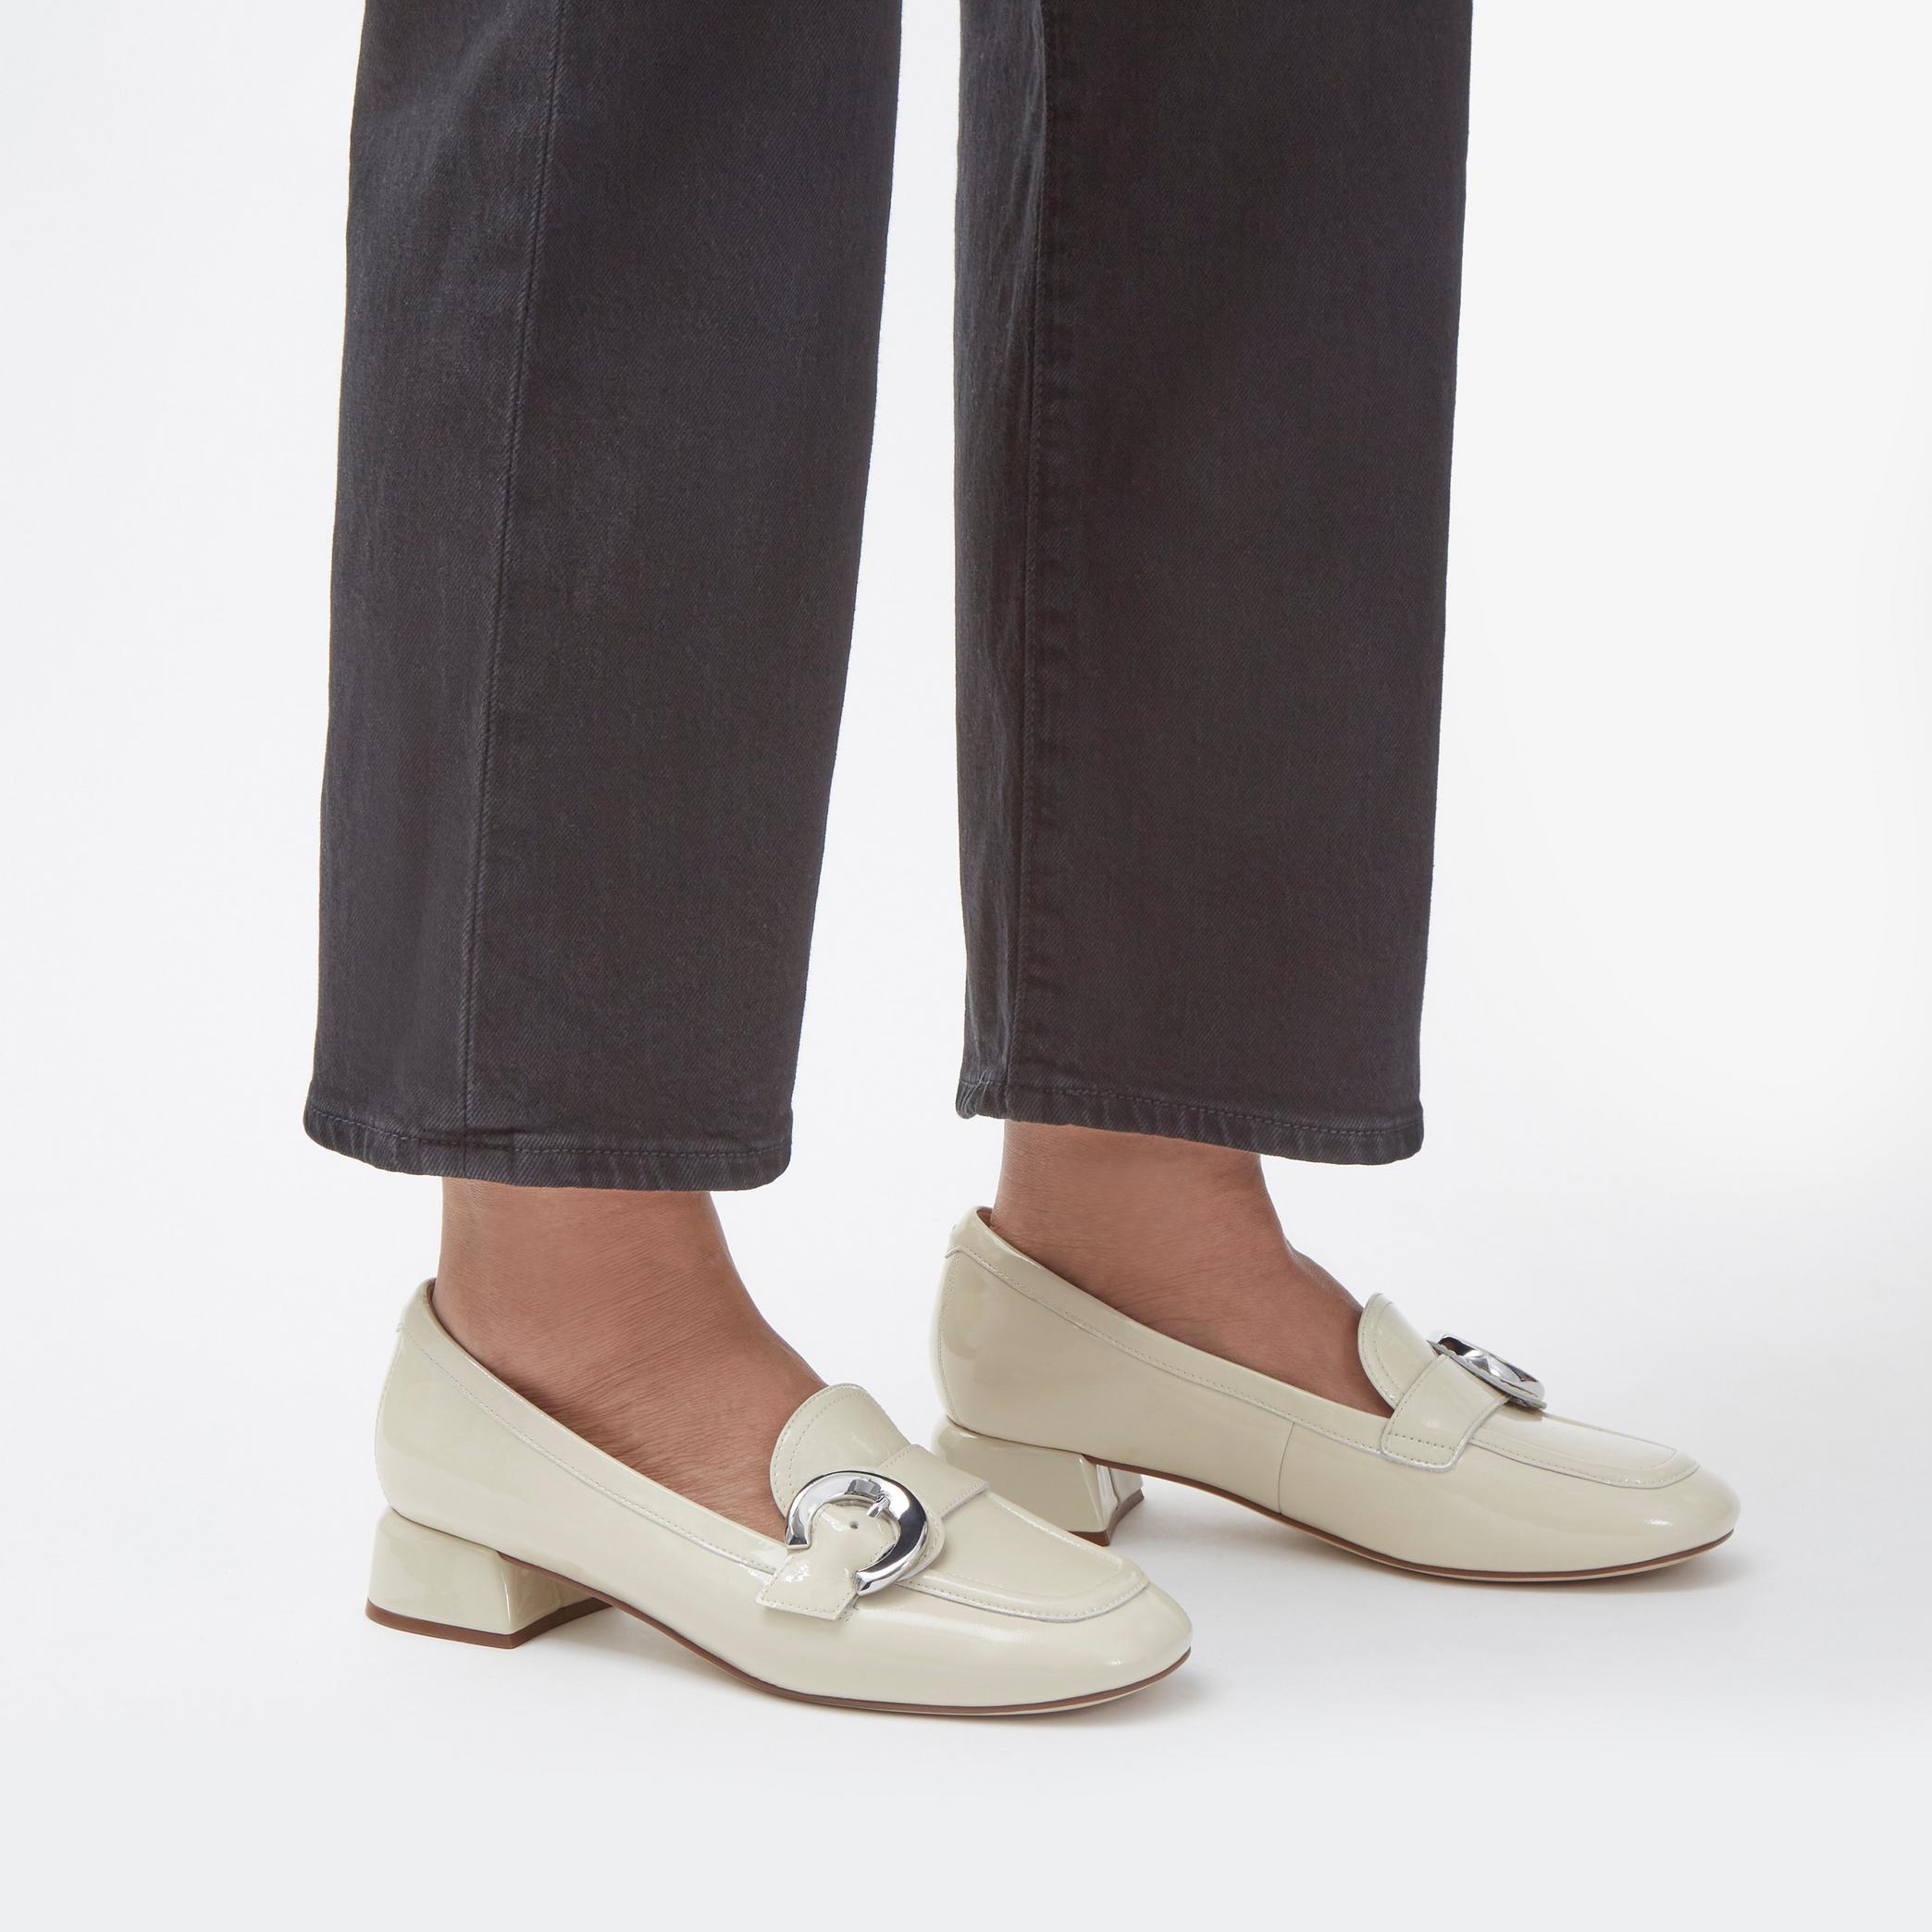 Daiss 30 Trim Ivory Loafers, view 2 of 8